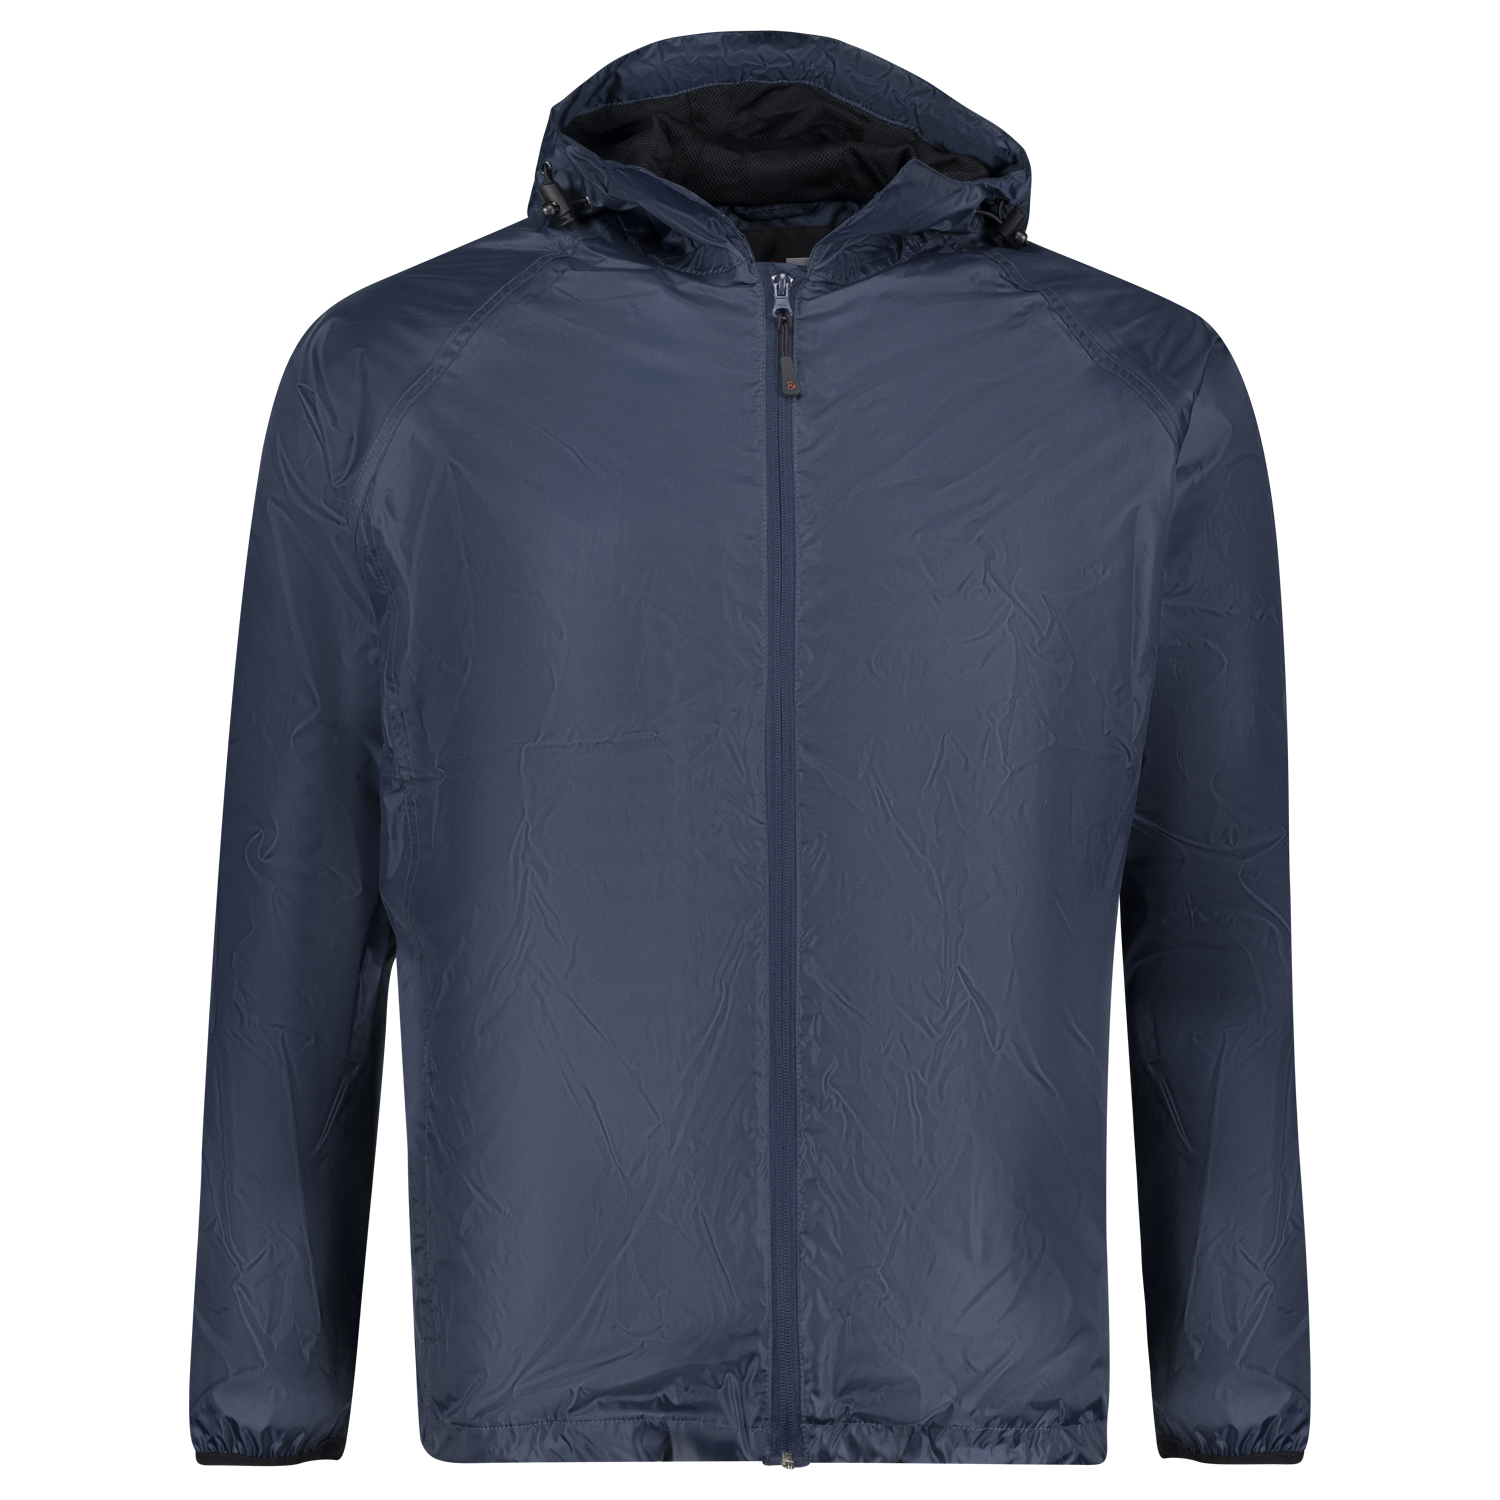 Blue wind and rain jacket from marc&mark in plus sizes up to 12XL